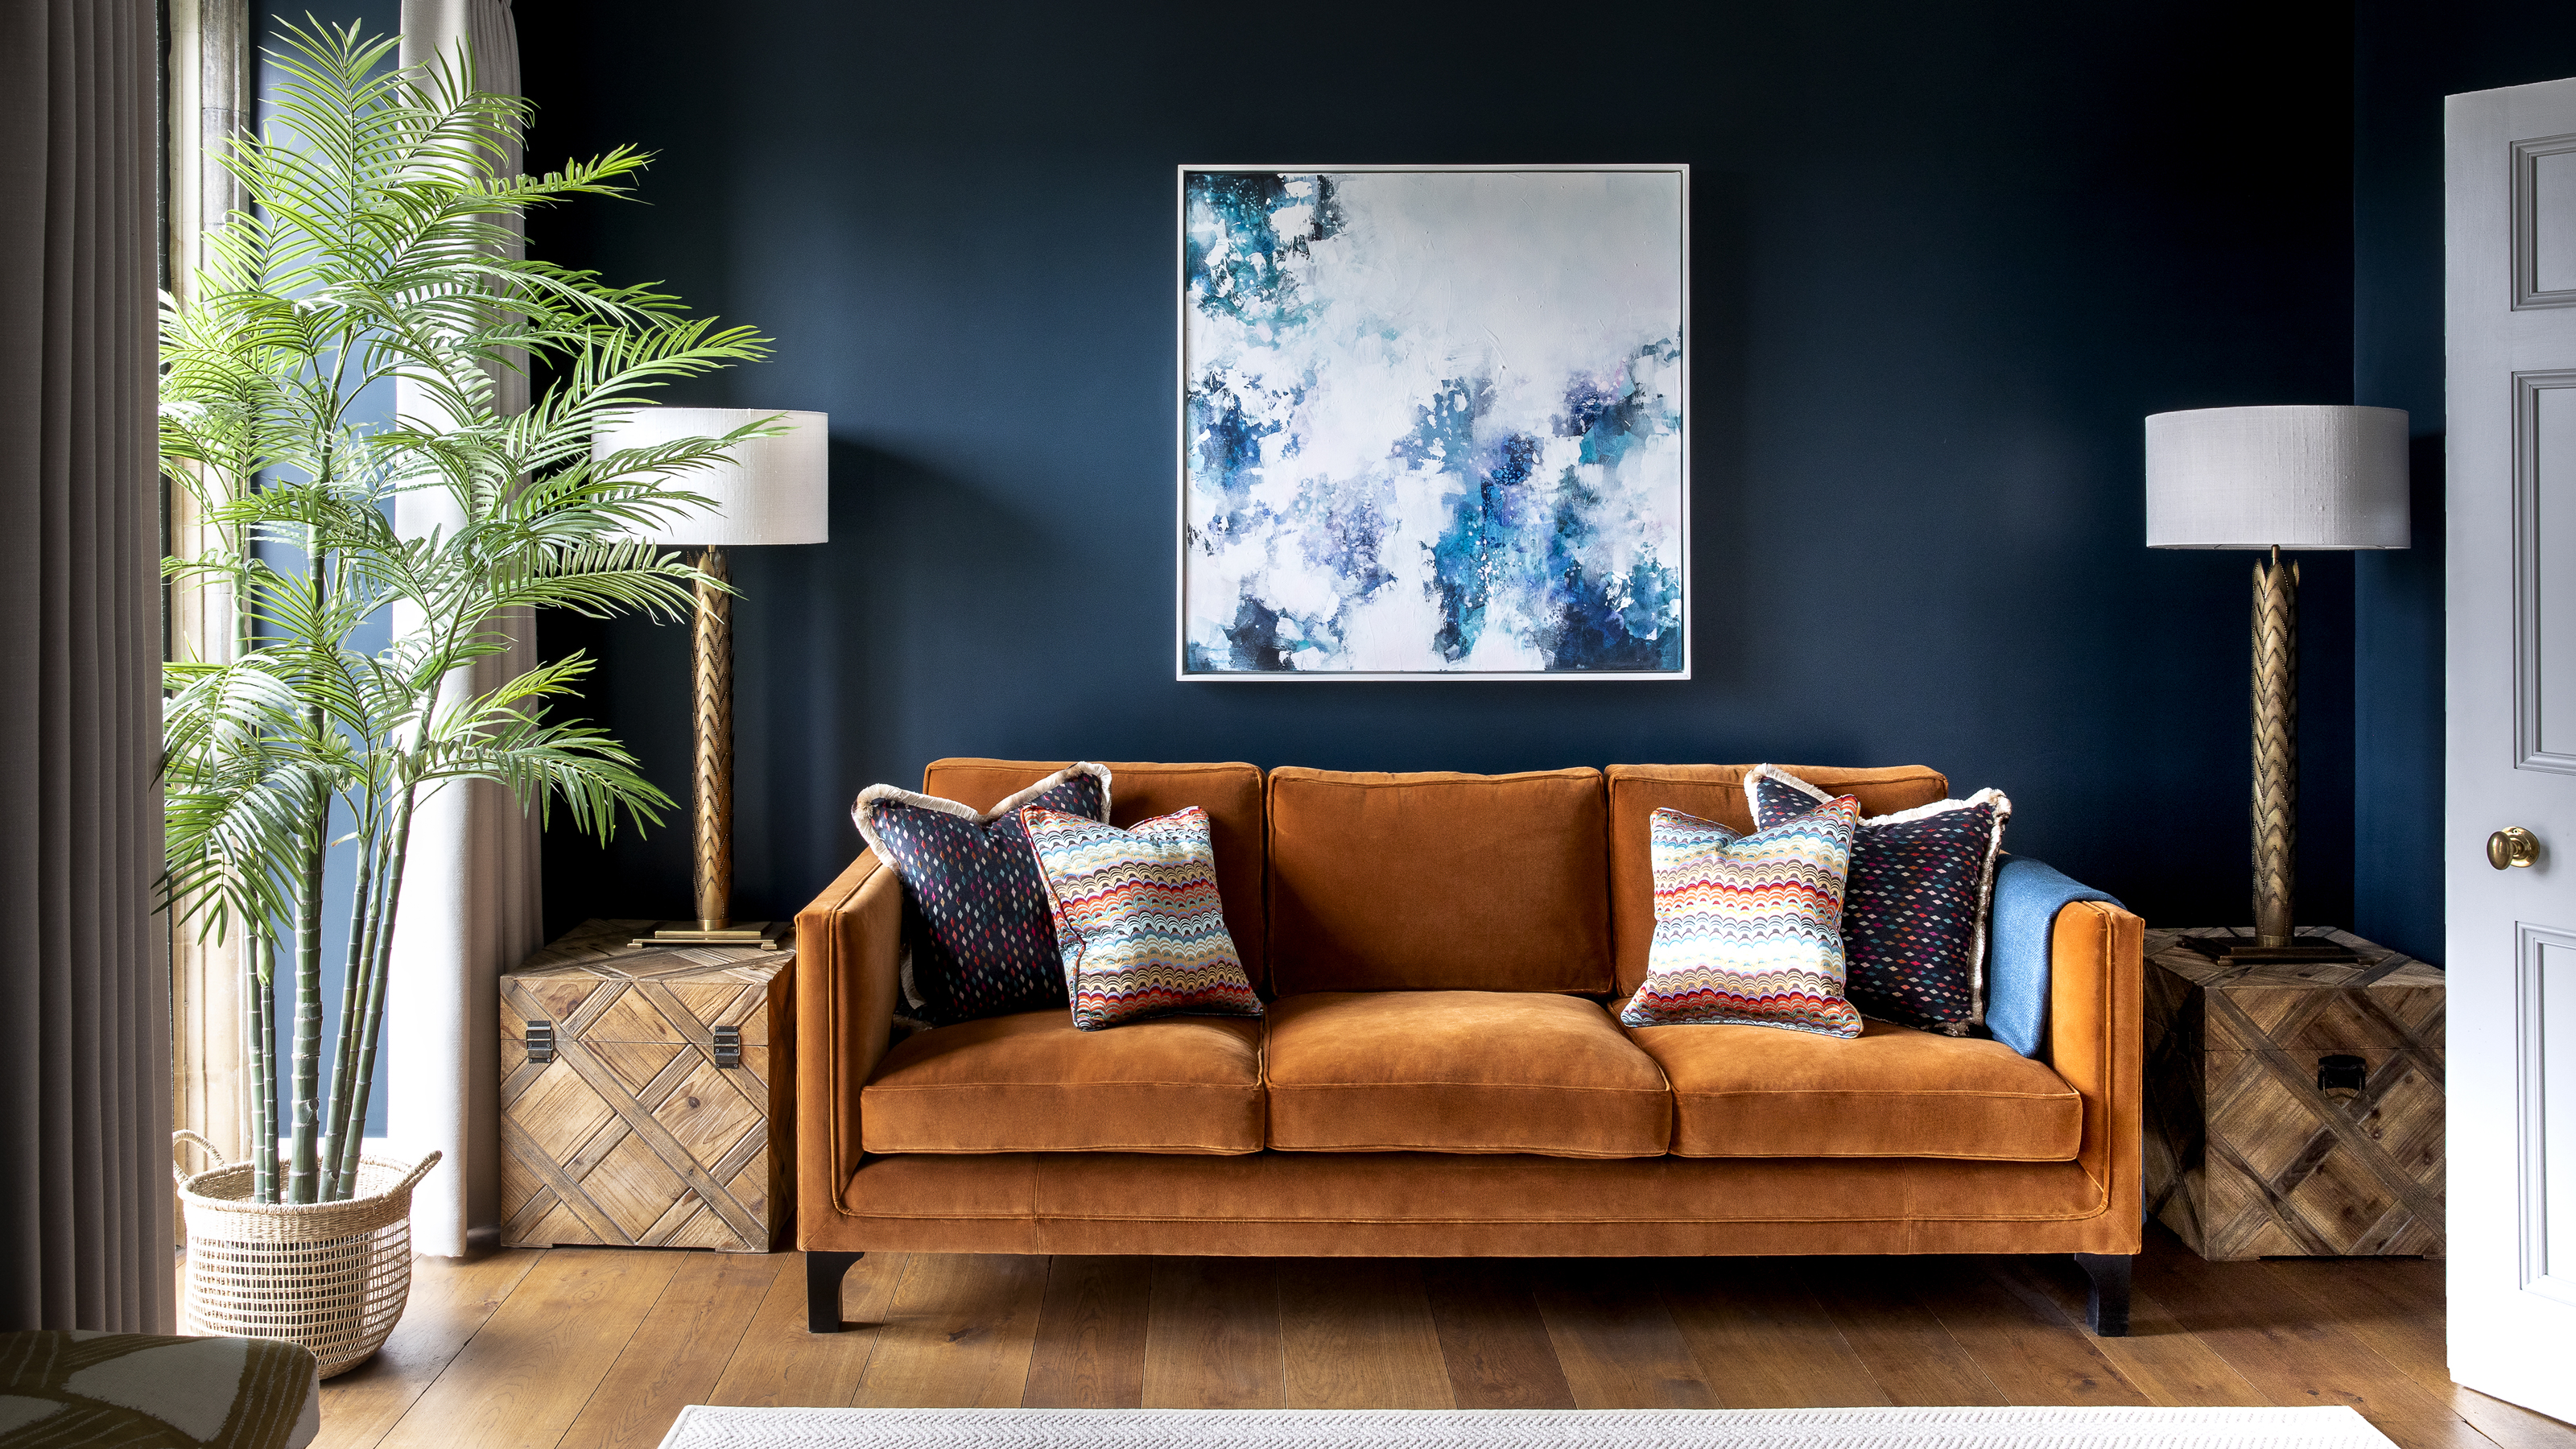 13 Awesome Color Schemes for Living Room with Brown Sofa - roomdsign.com